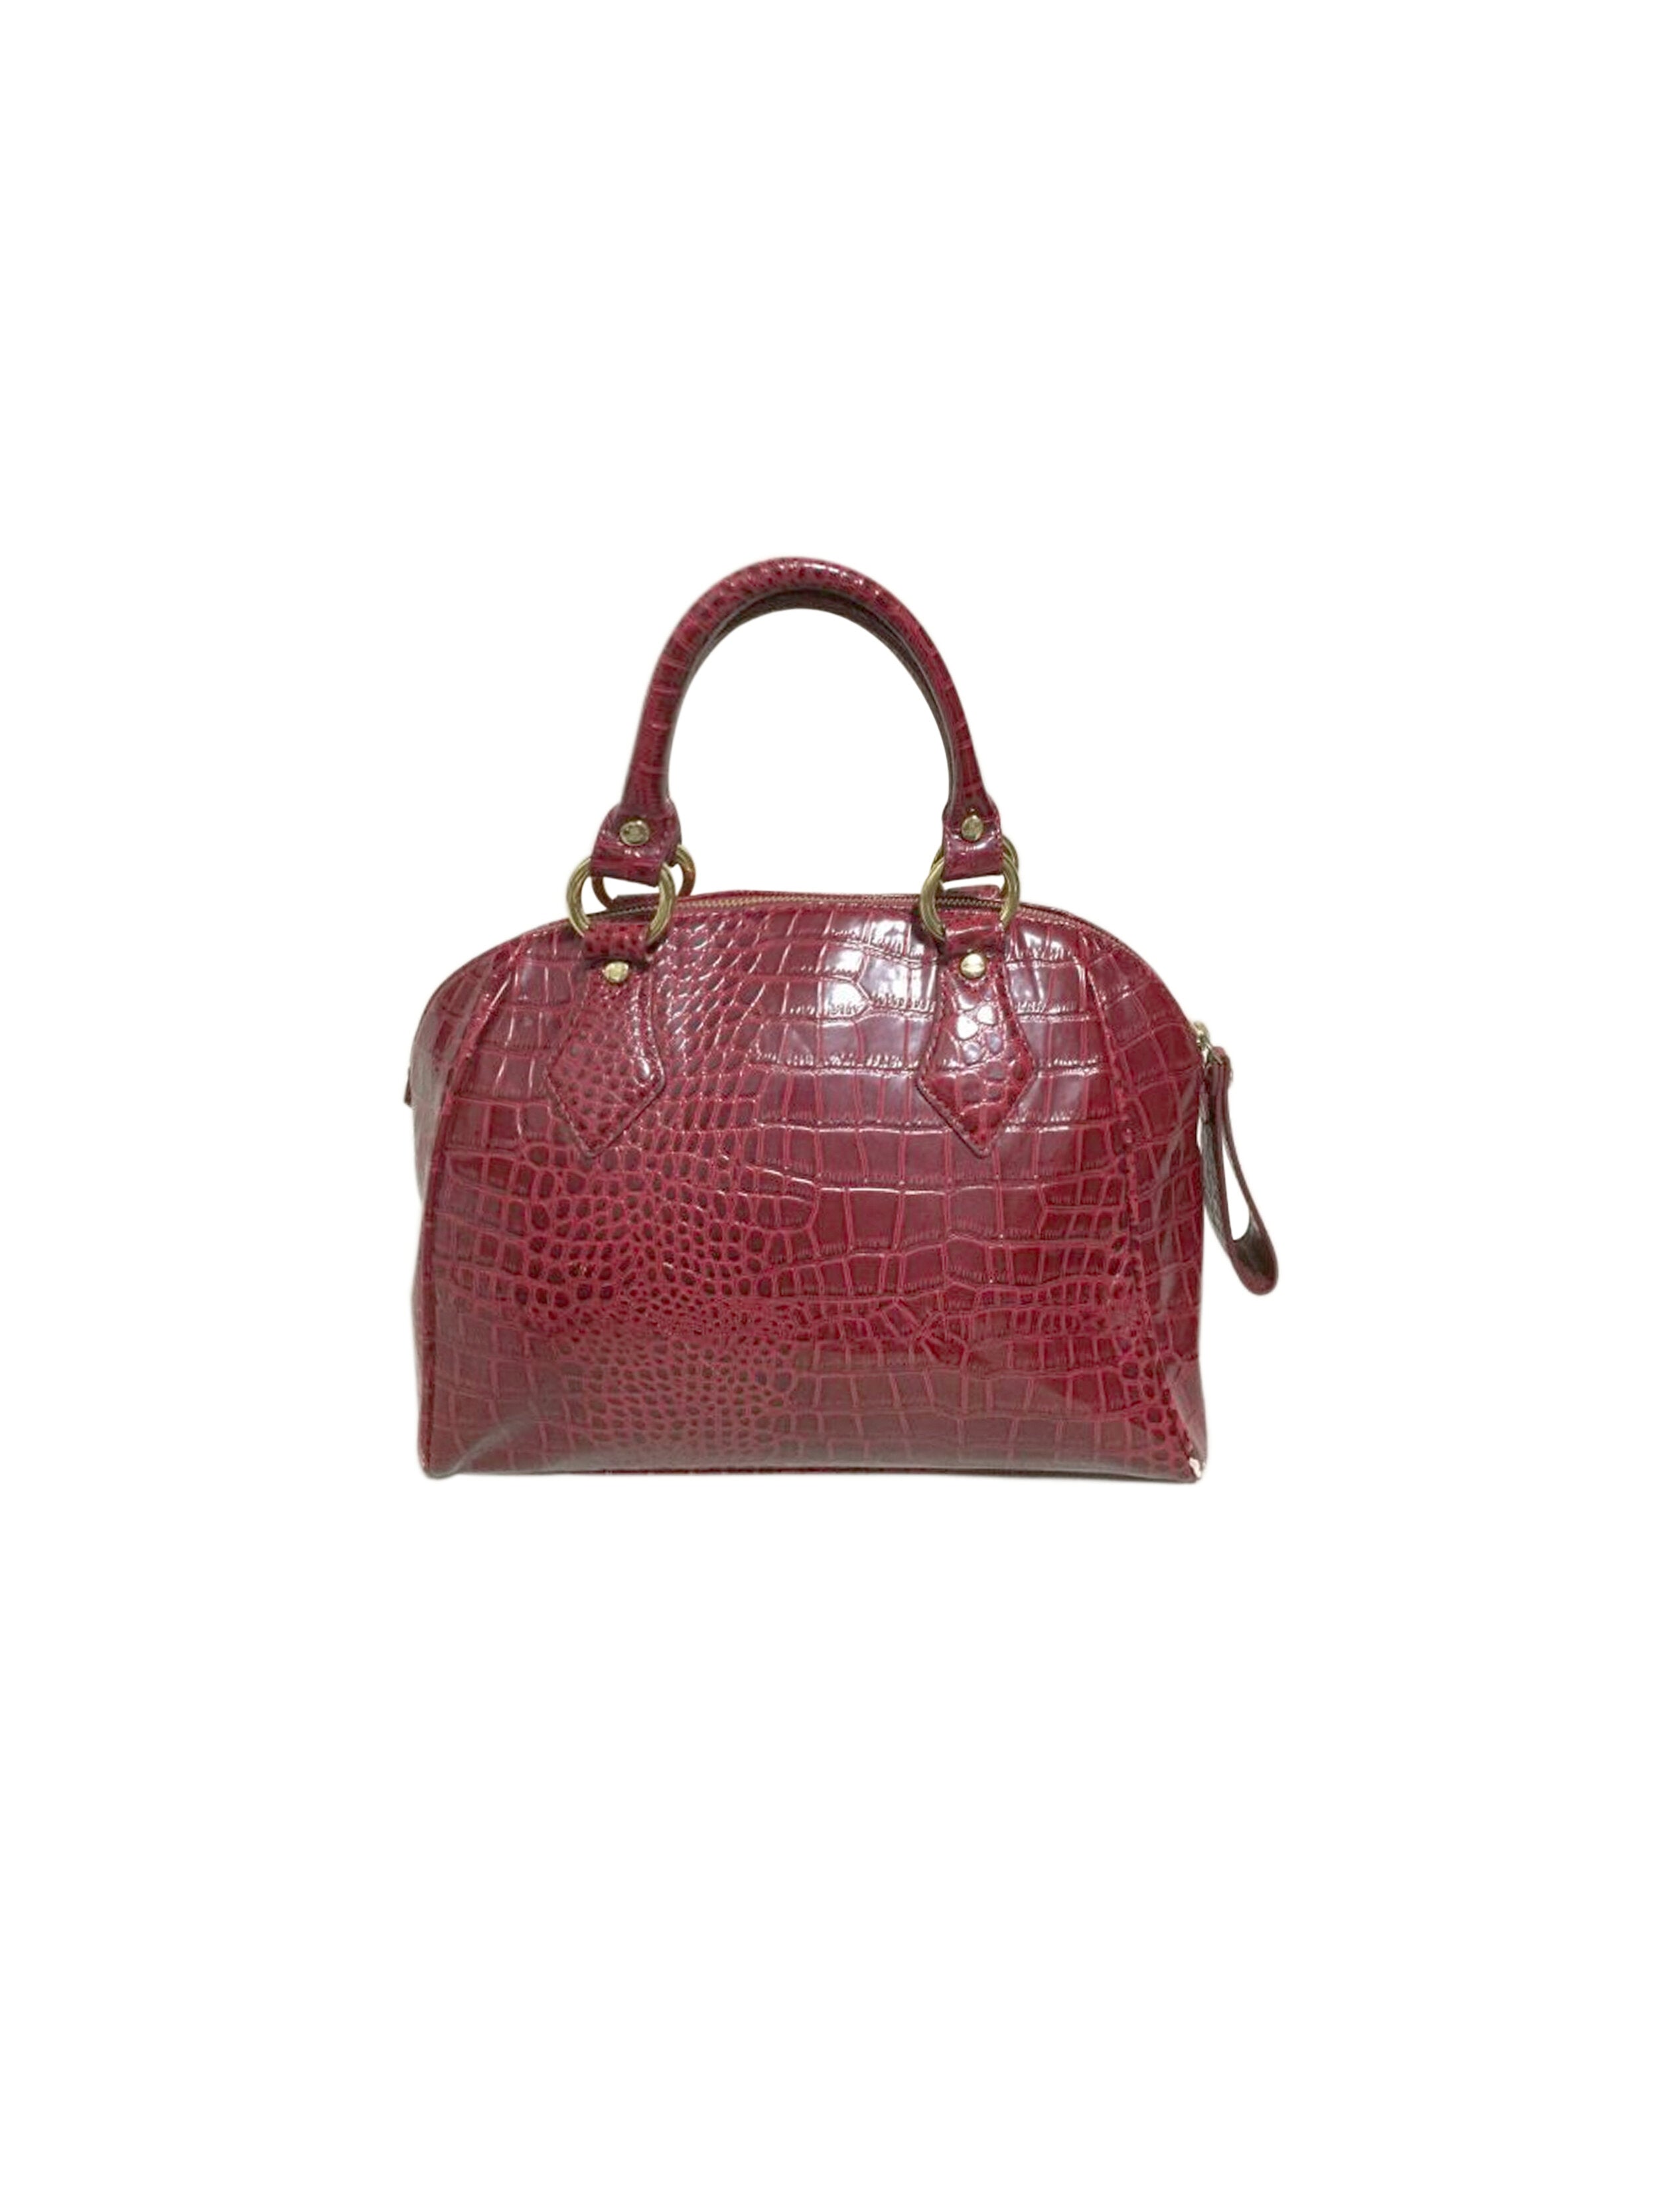 Chancery heart leather handbag Vivienne Westwood Red in Leather